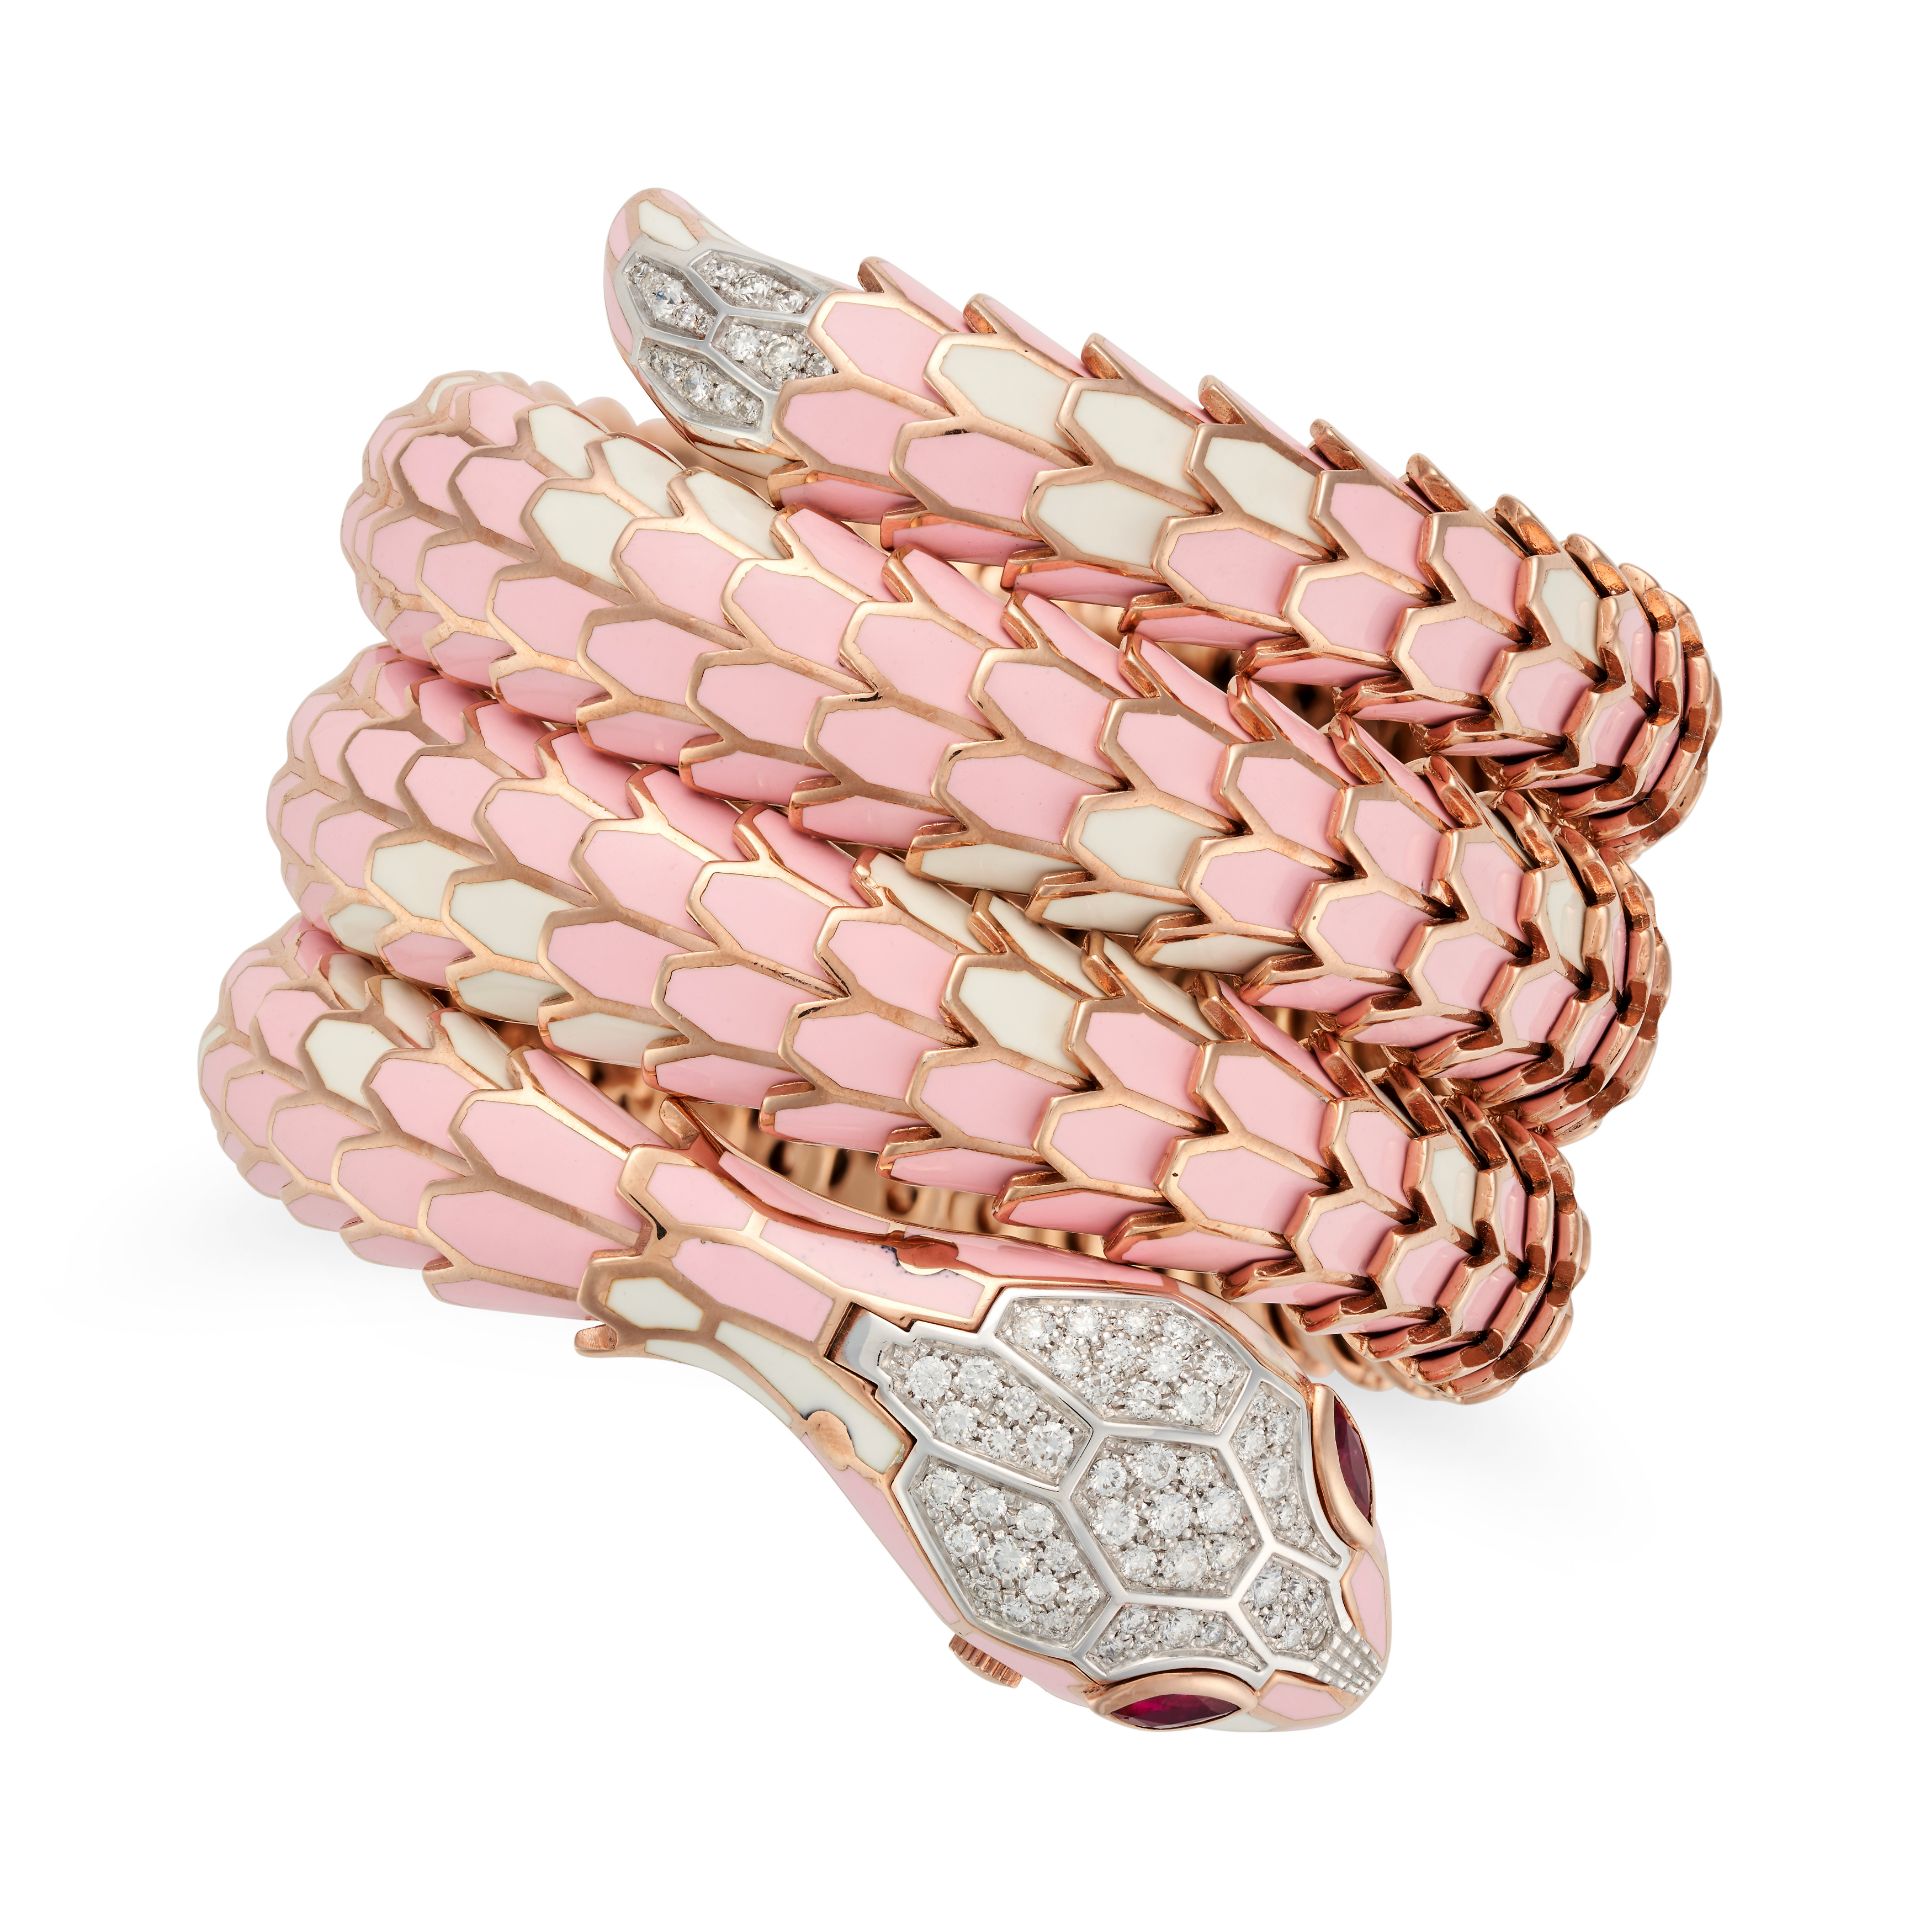 ALEXIS NY, A DIAMOND, RUBY AND ENAMEL SNAKE BRACELET the snake comprising a row of articulated li... - Image 4 of 4